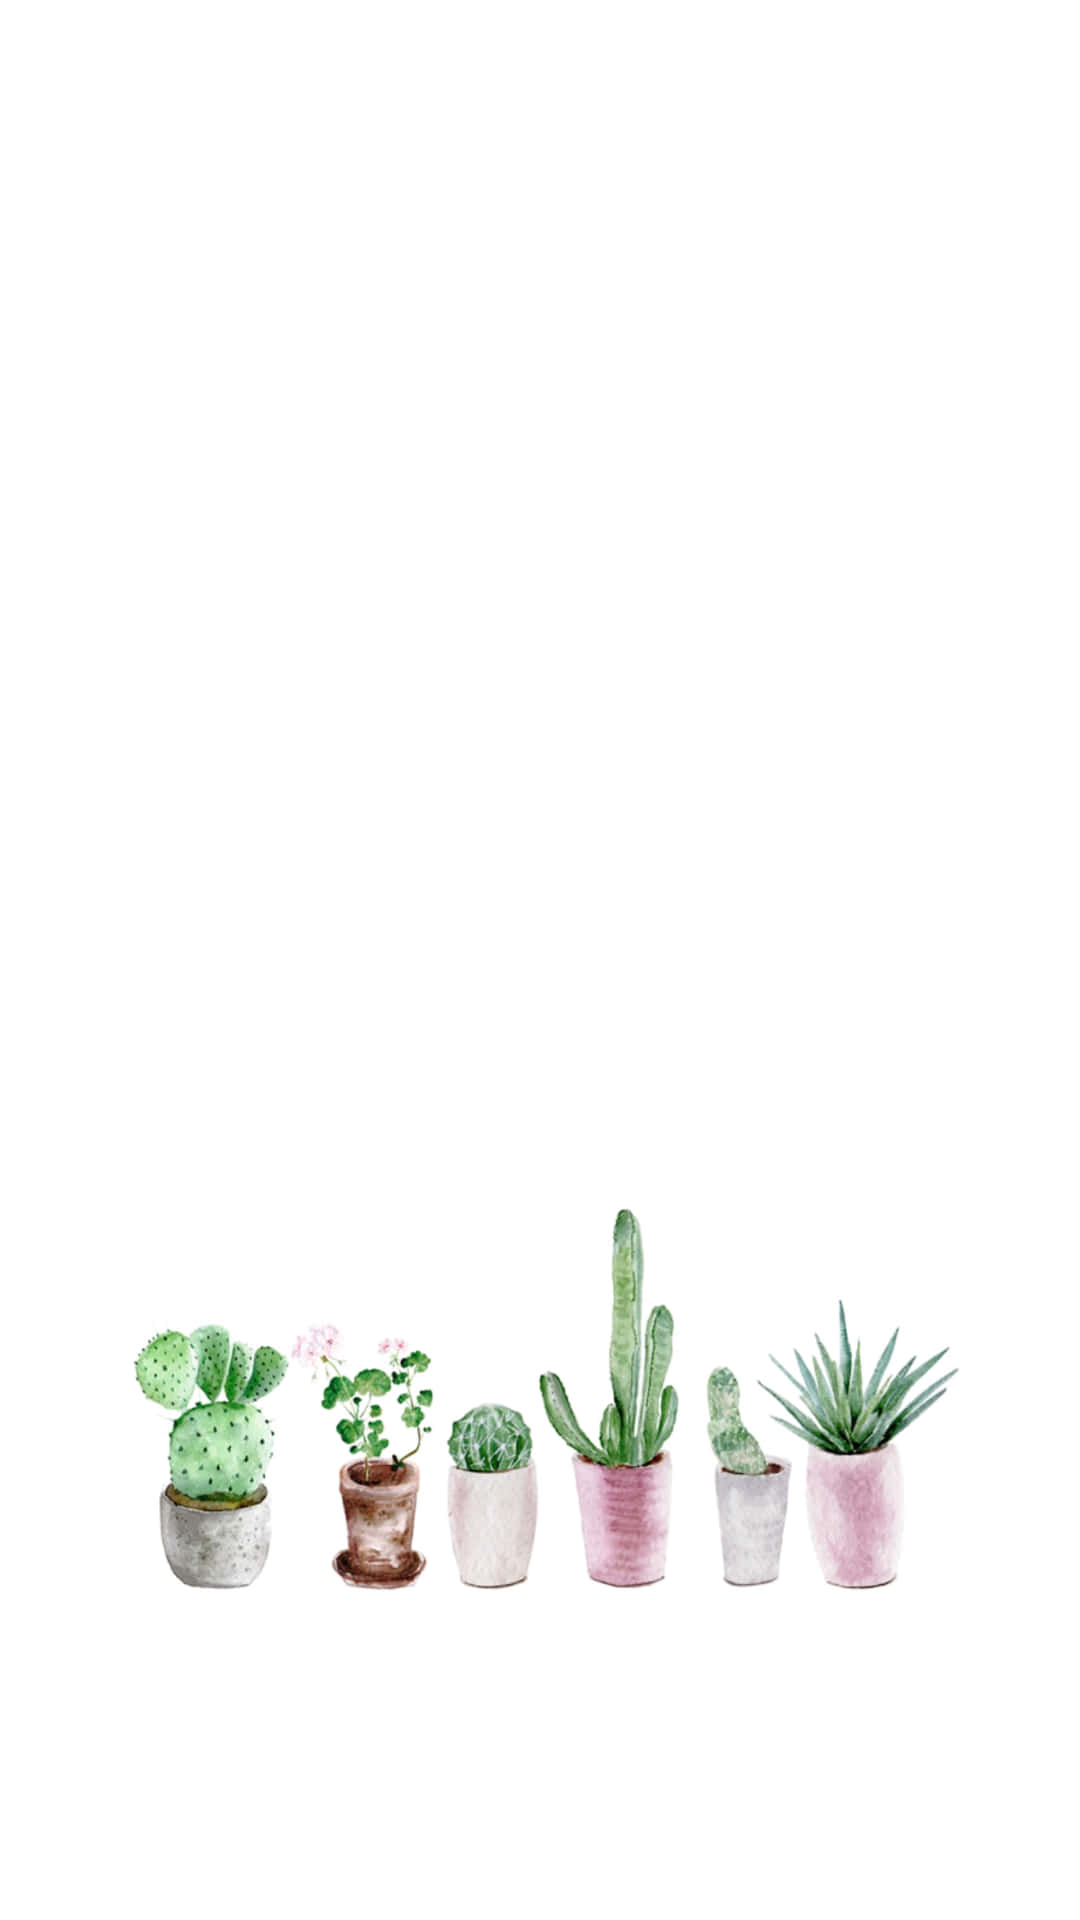 A Cute Cactus Turning to the Sun Wallpaper